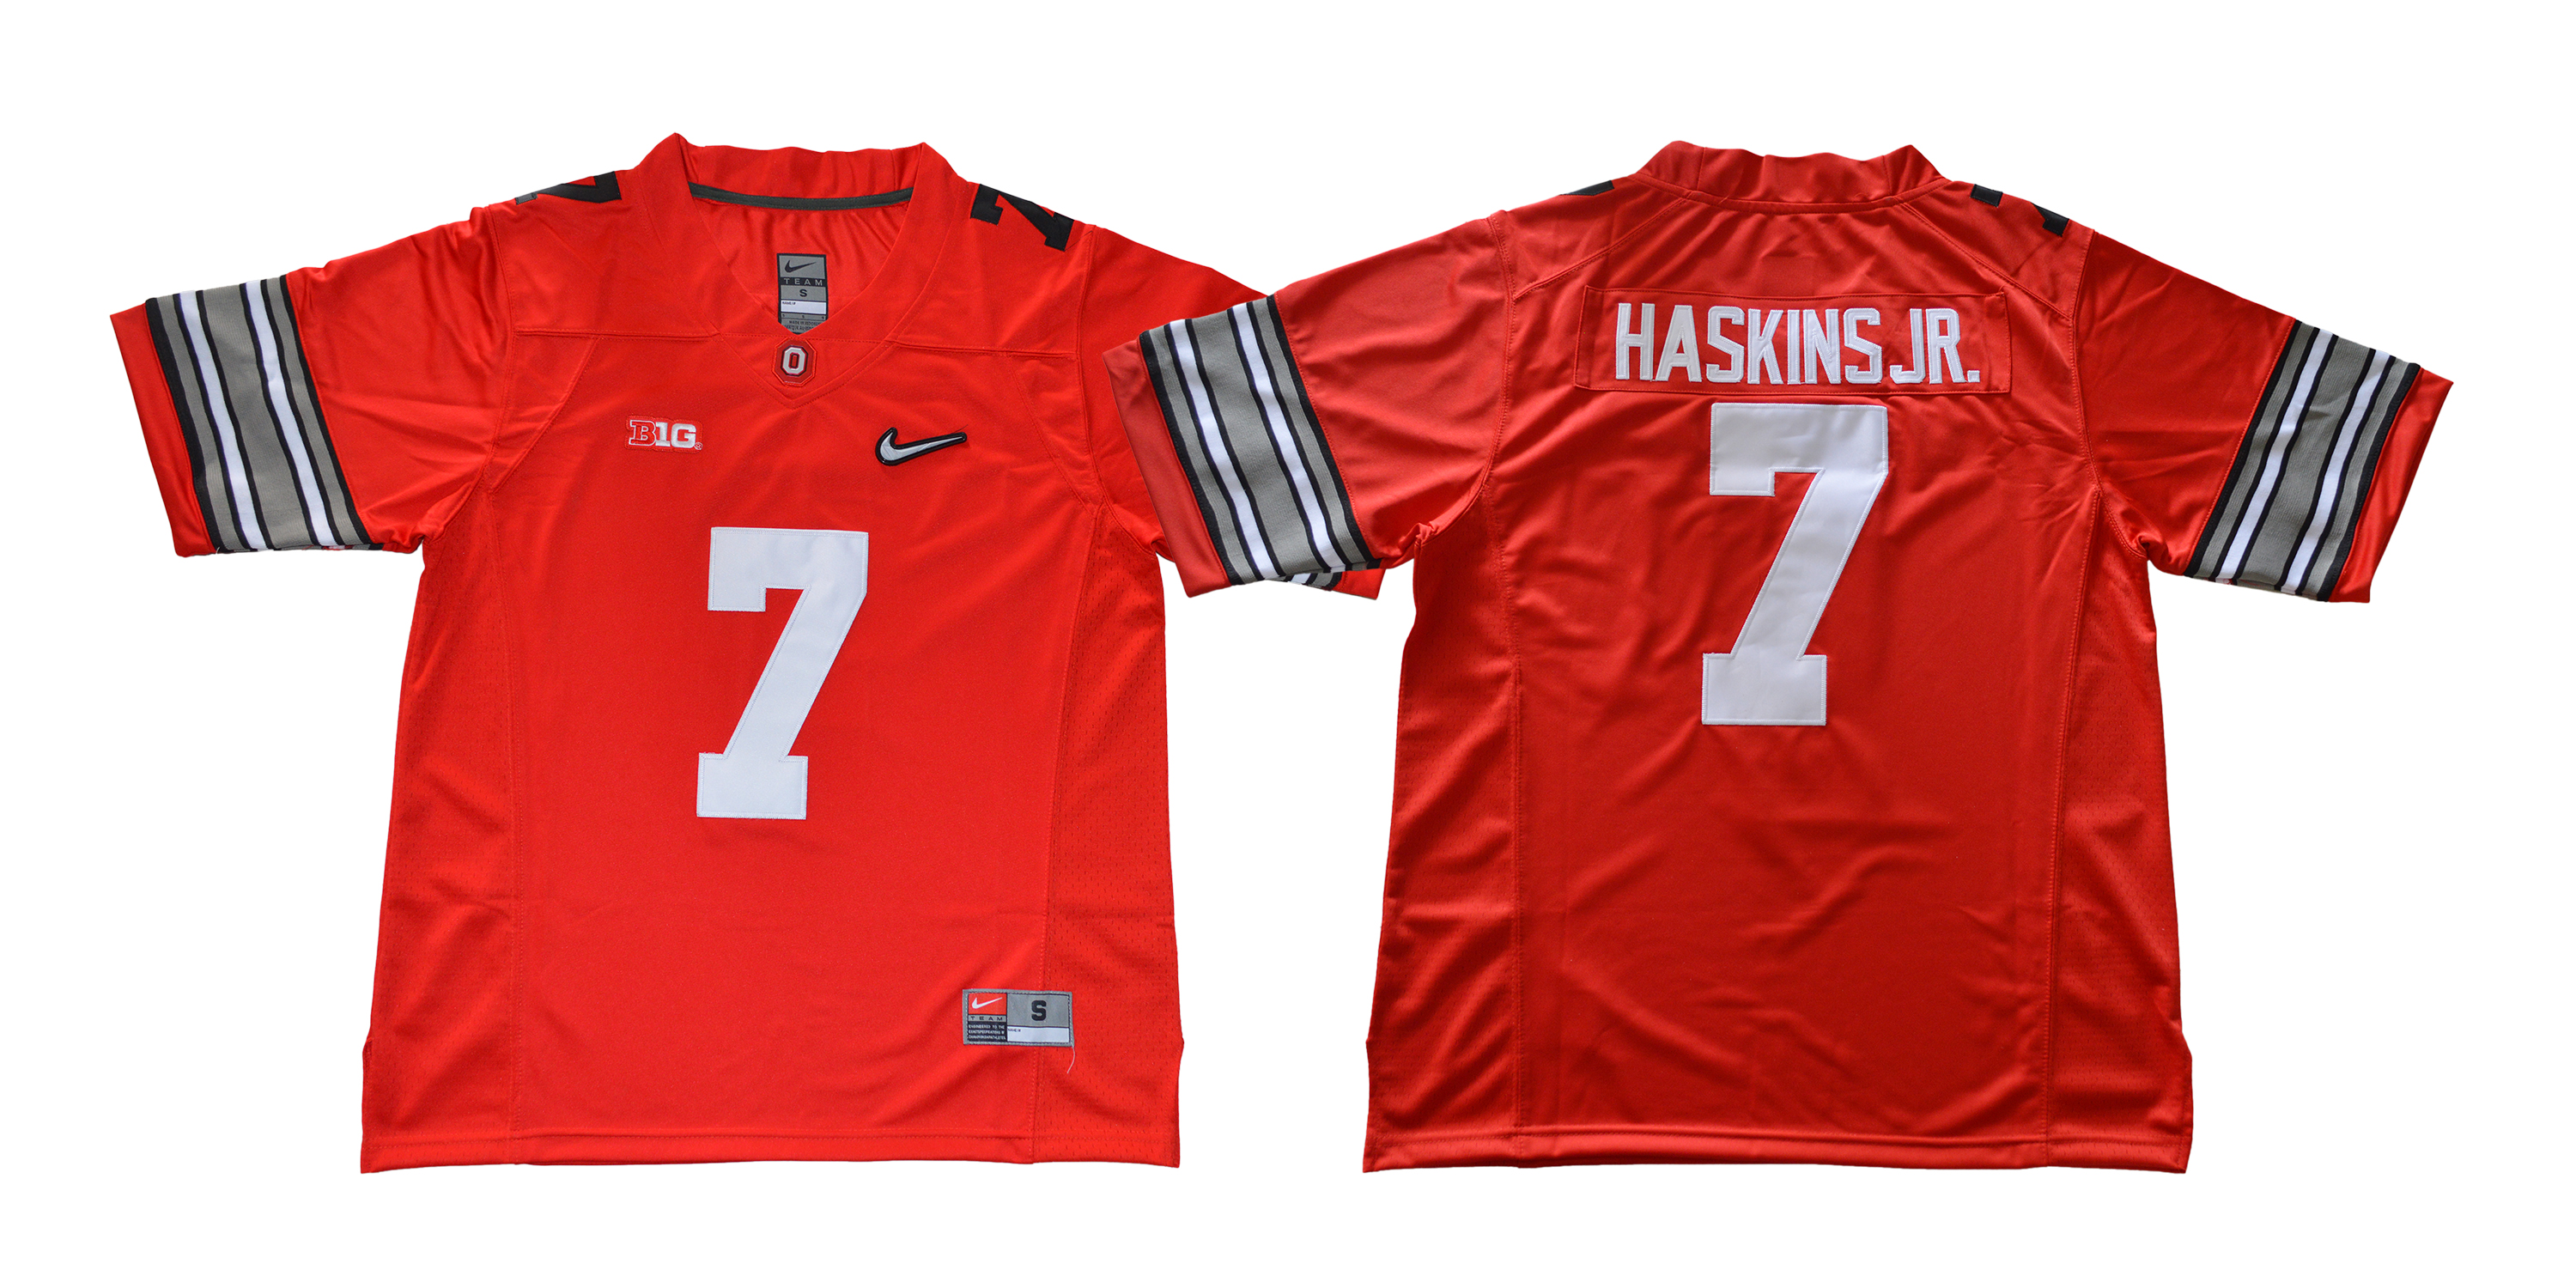 Ohio State Buckeyes 7 Dwayne Haskins Jr. Red College Football Jersey